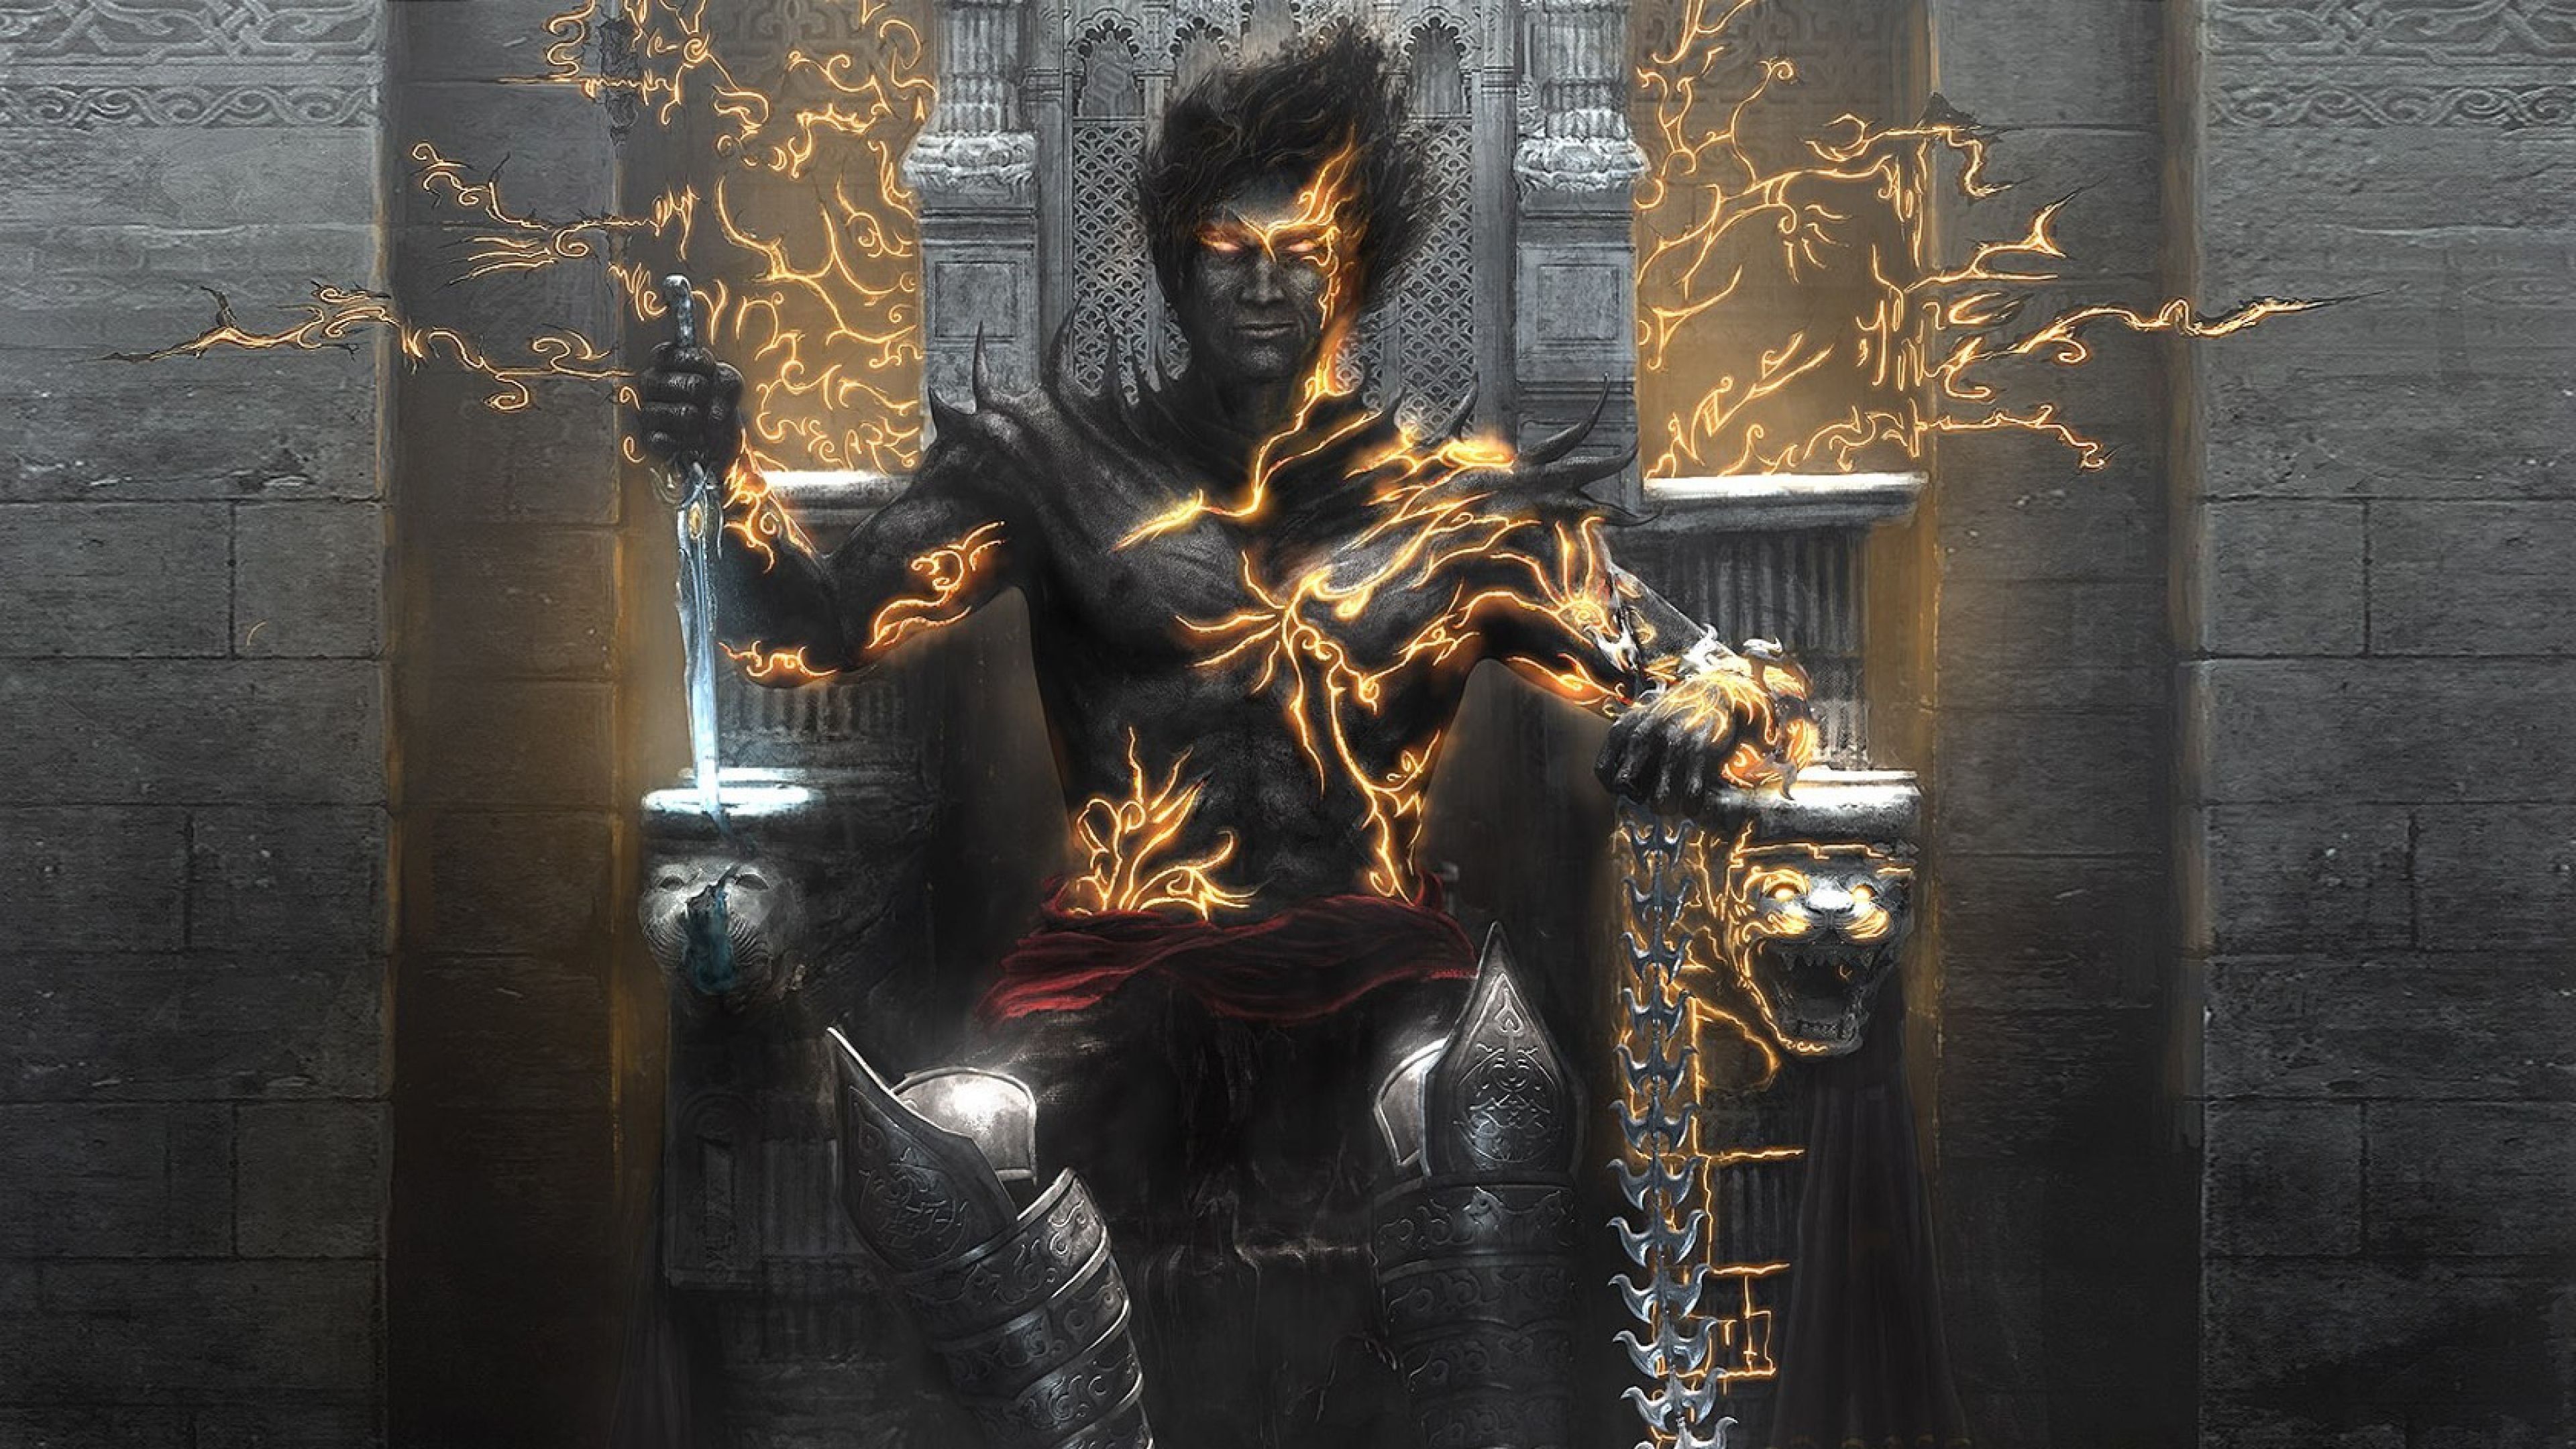 Download Wallpaper 3840x2160 Prince of persia, Knife, Throne ...